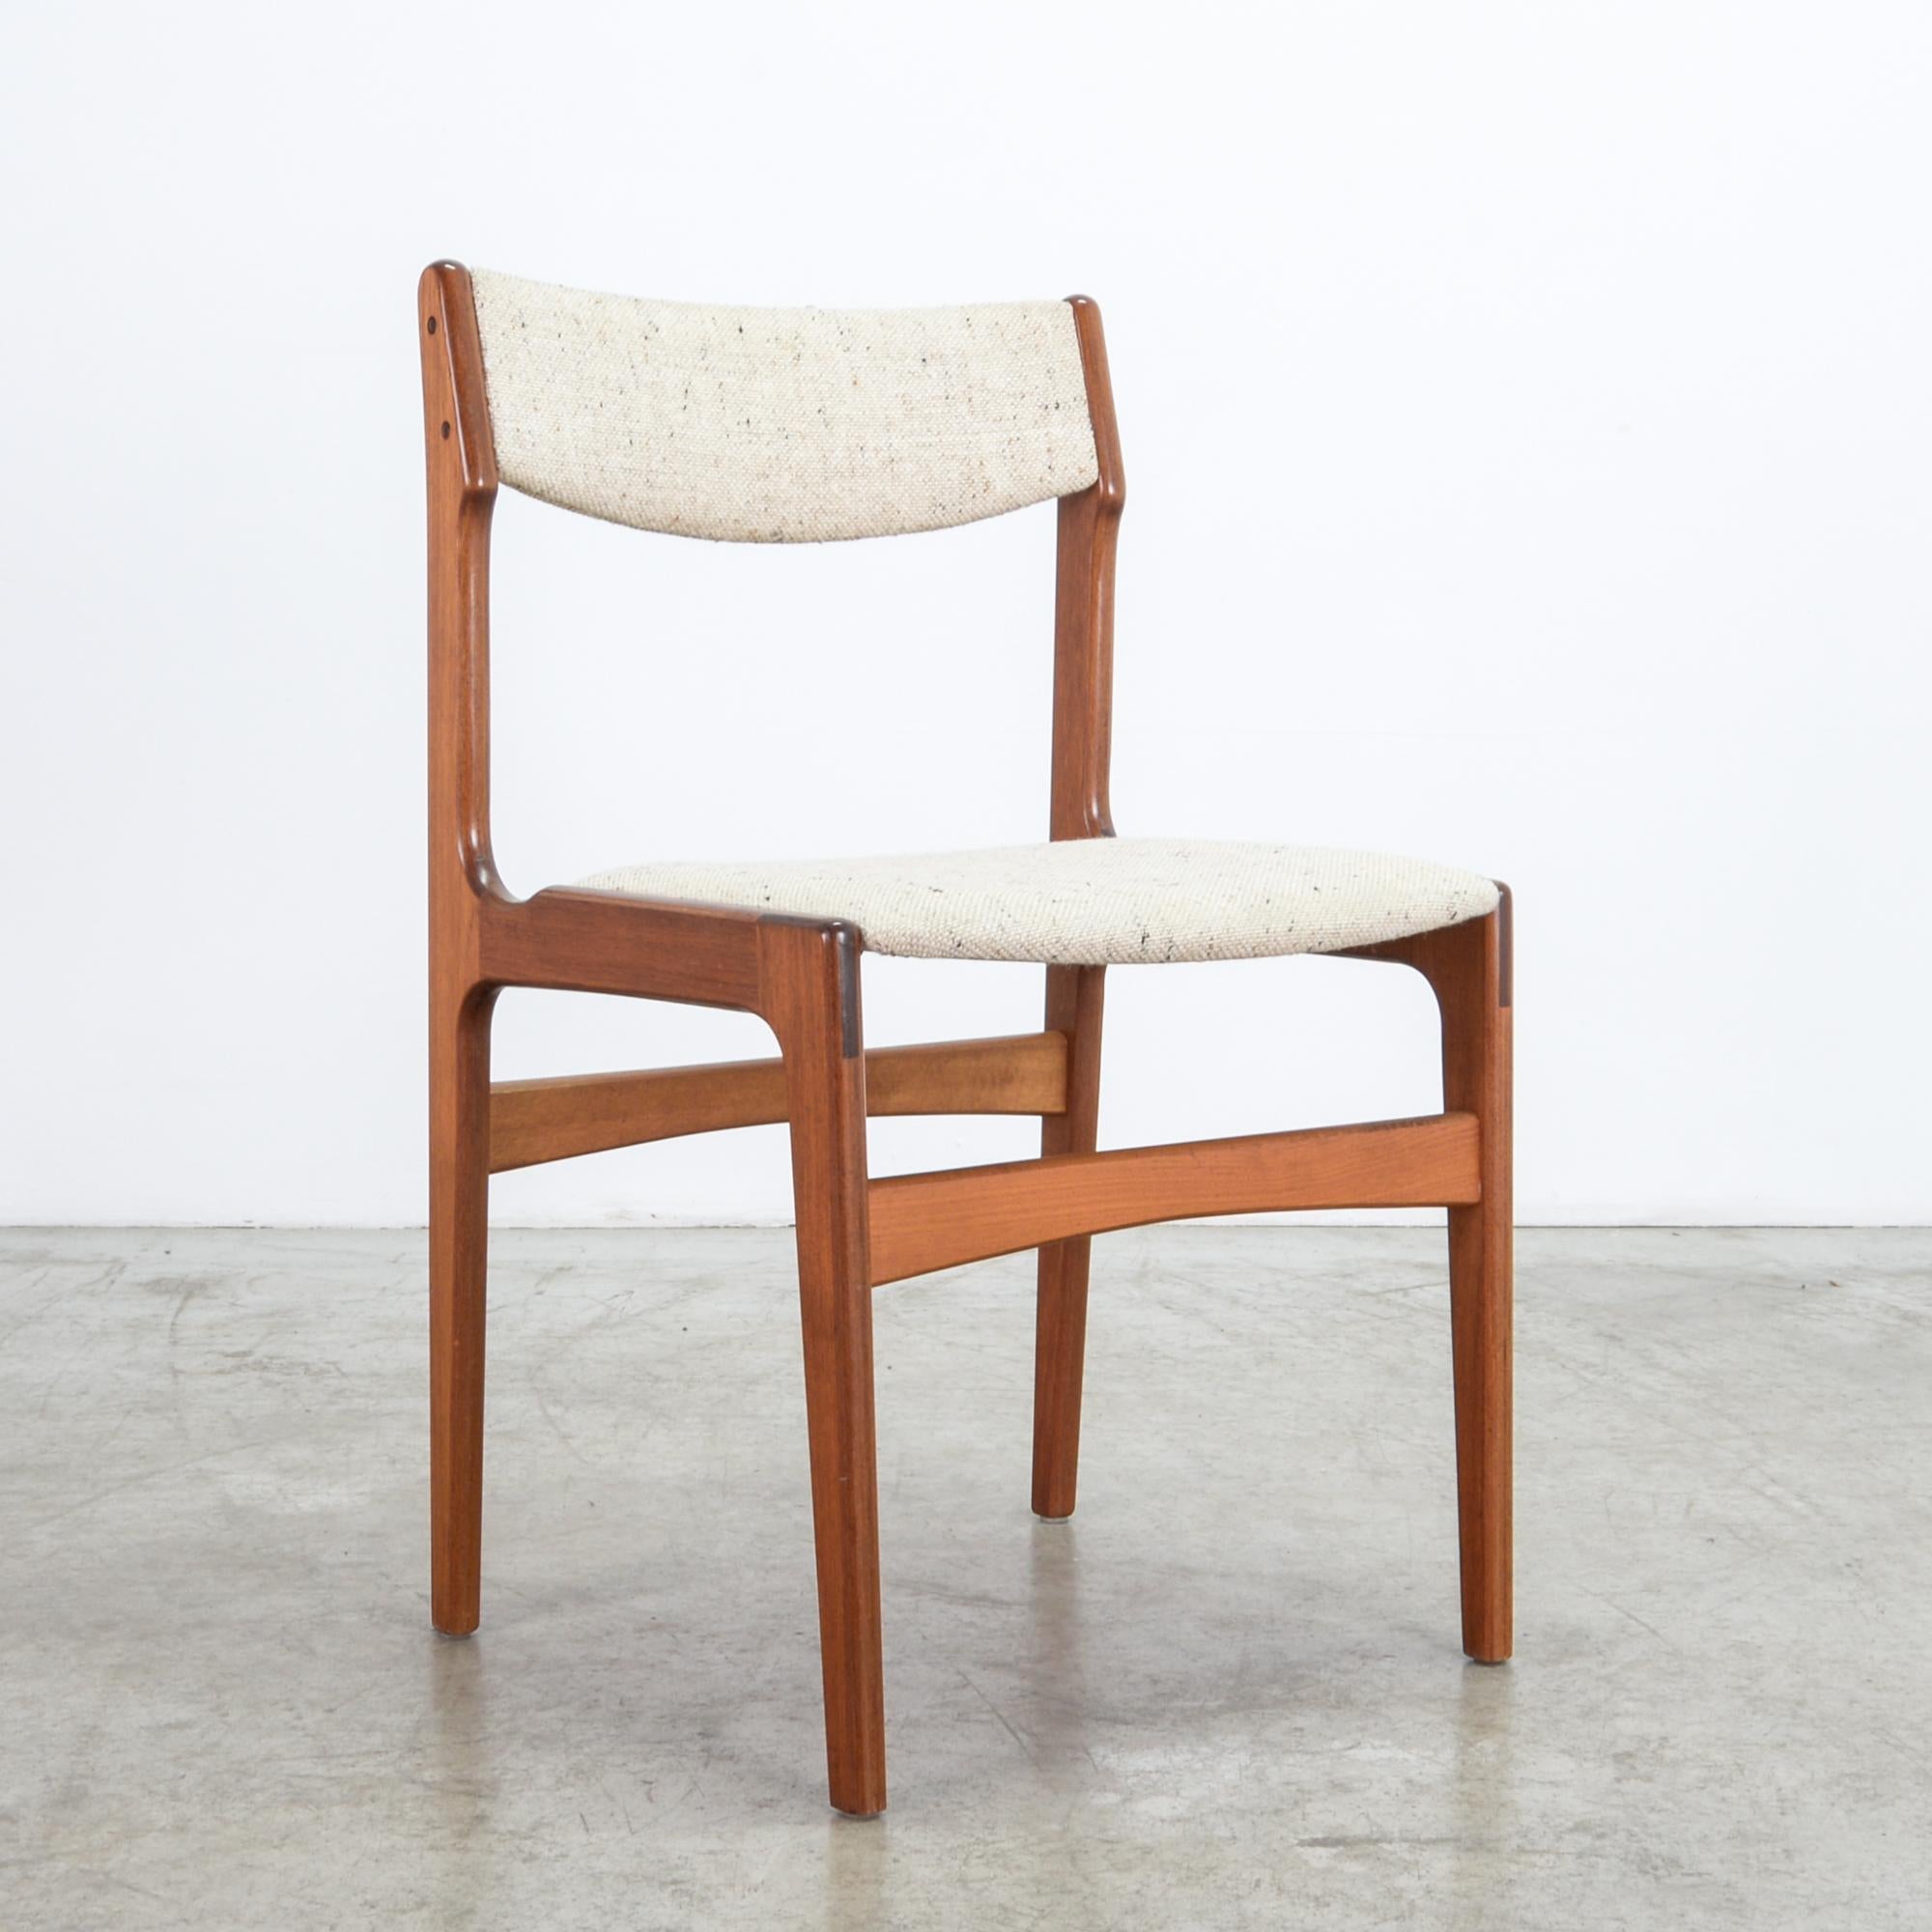 From Denmark circa 1960, these simple and finely crafted chairs are sleek and inviting. Updated with a cotton-linen-polyester upholstery fabric, with great natural texture and easily cleaned. A characteristic mid-20th century design features clean